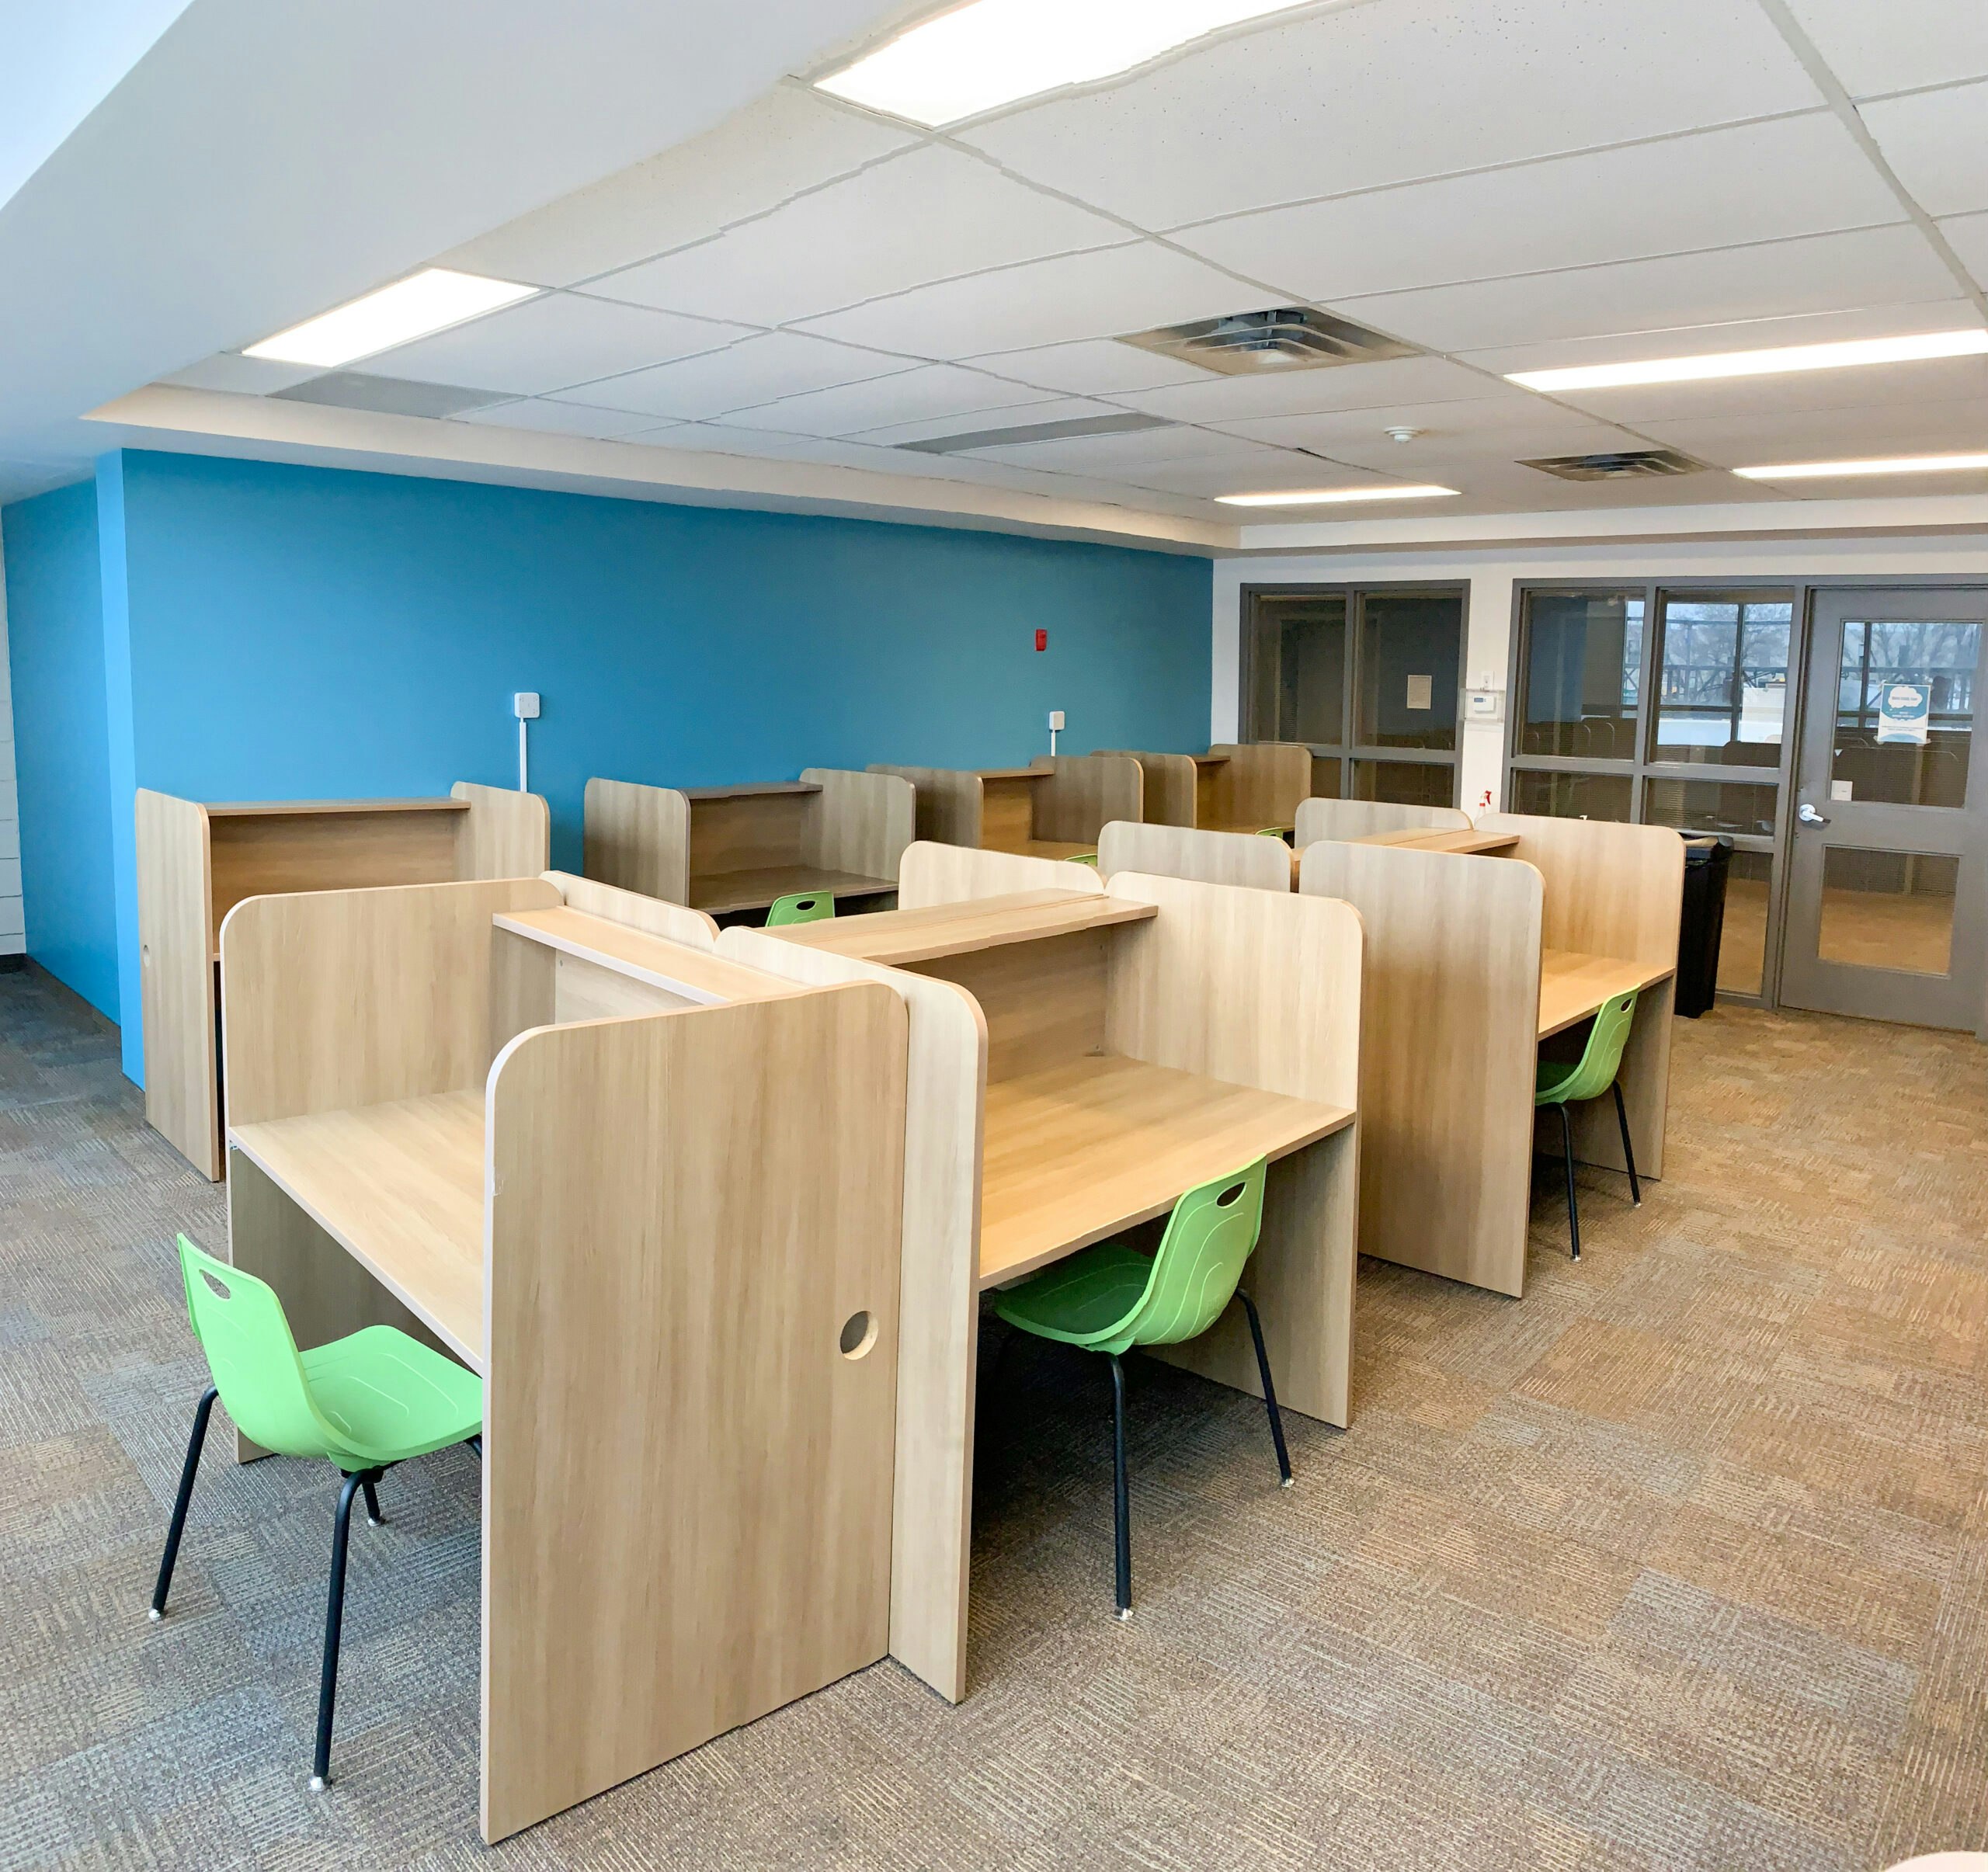 Cubicles with chairs